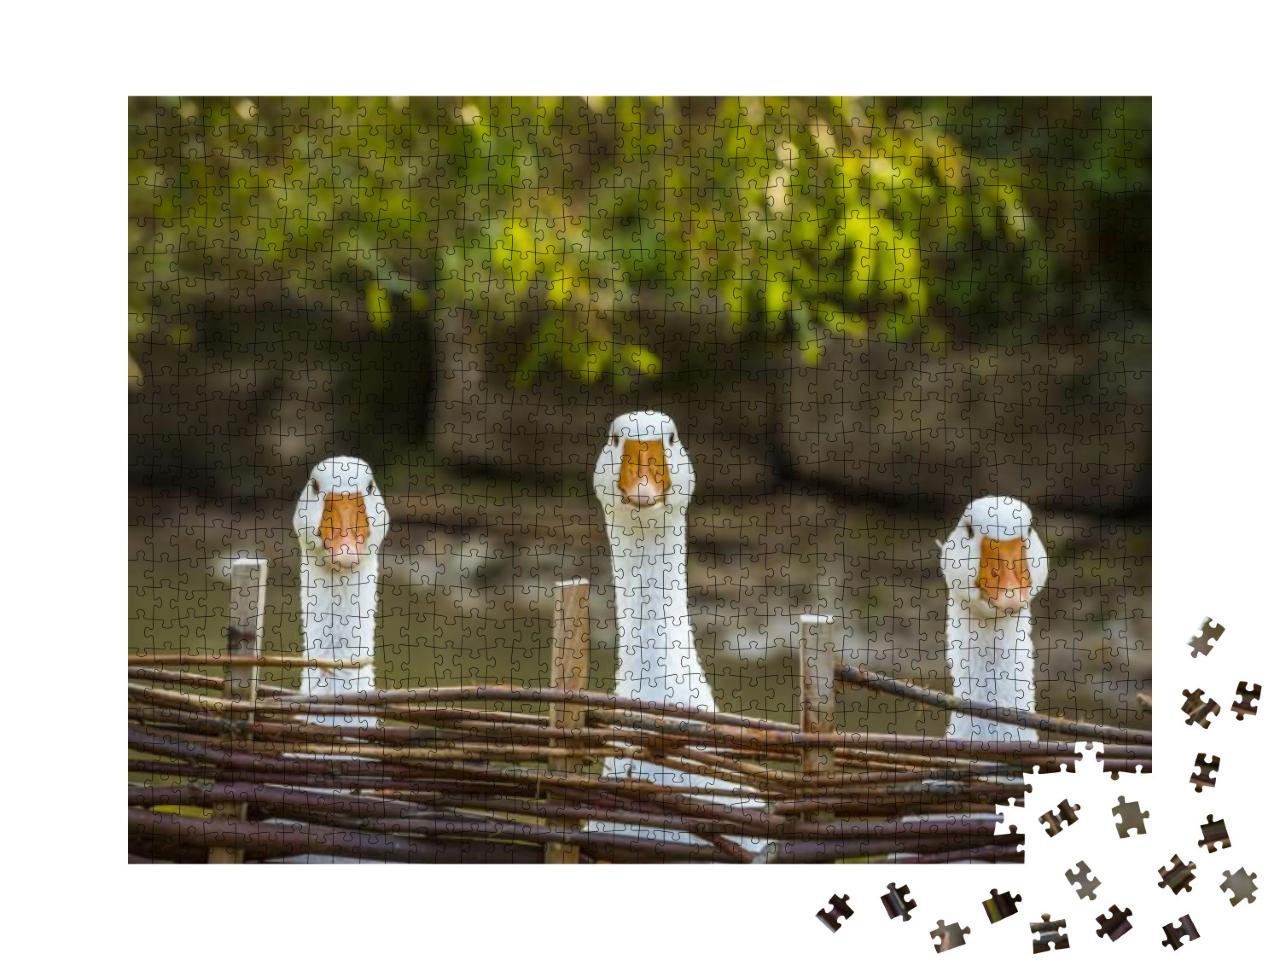 Three Funny White Geese - Funny Image with Three Domestic... Jigsaw Puzzle with 1000 pieces